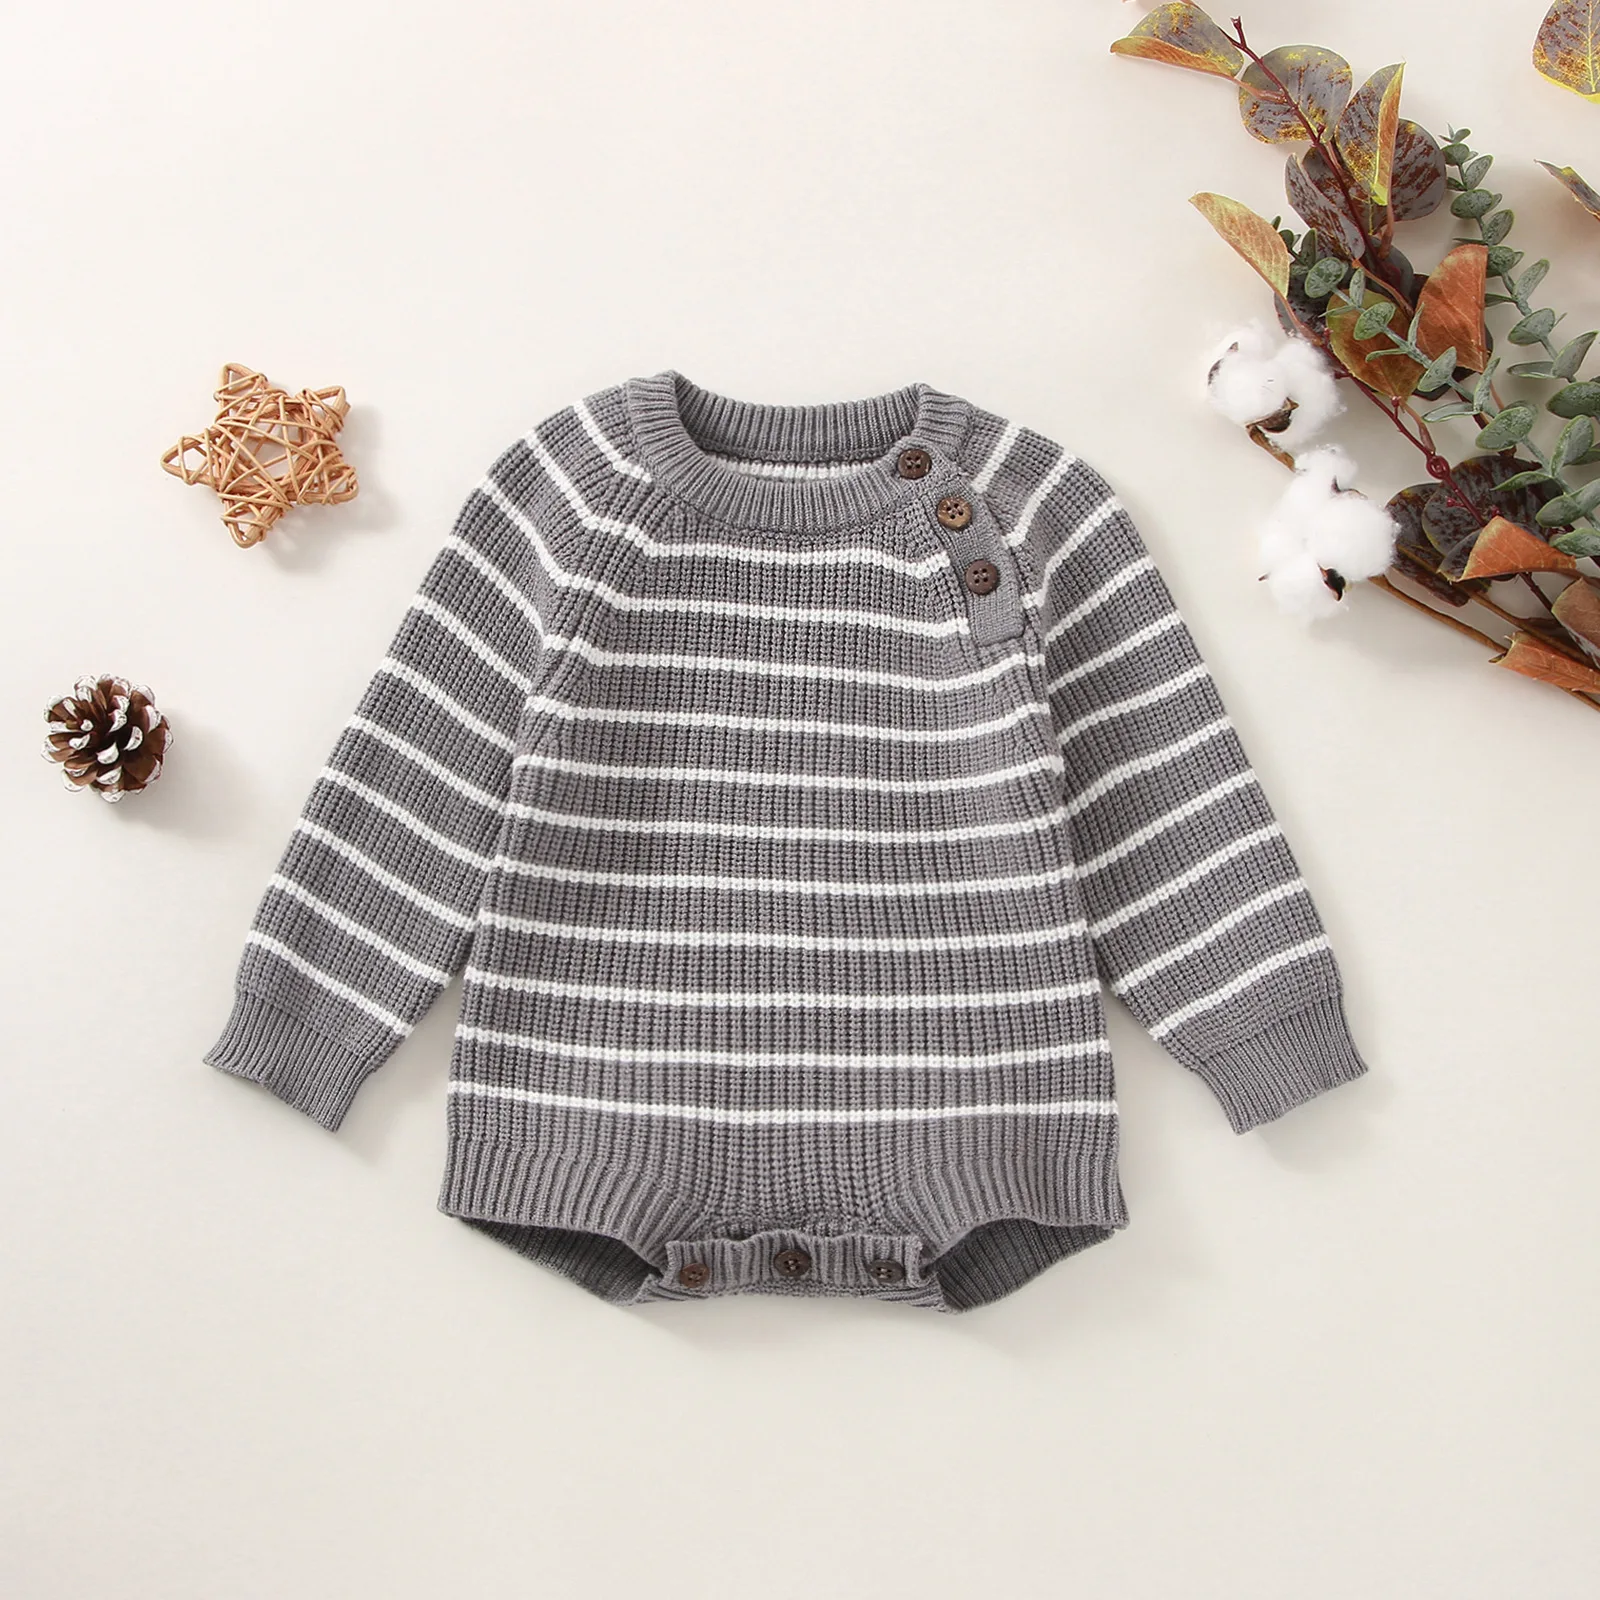 INS 2022 autumn clothes soft knitted sweater stripe design good quality kids clothes baby girls rompers